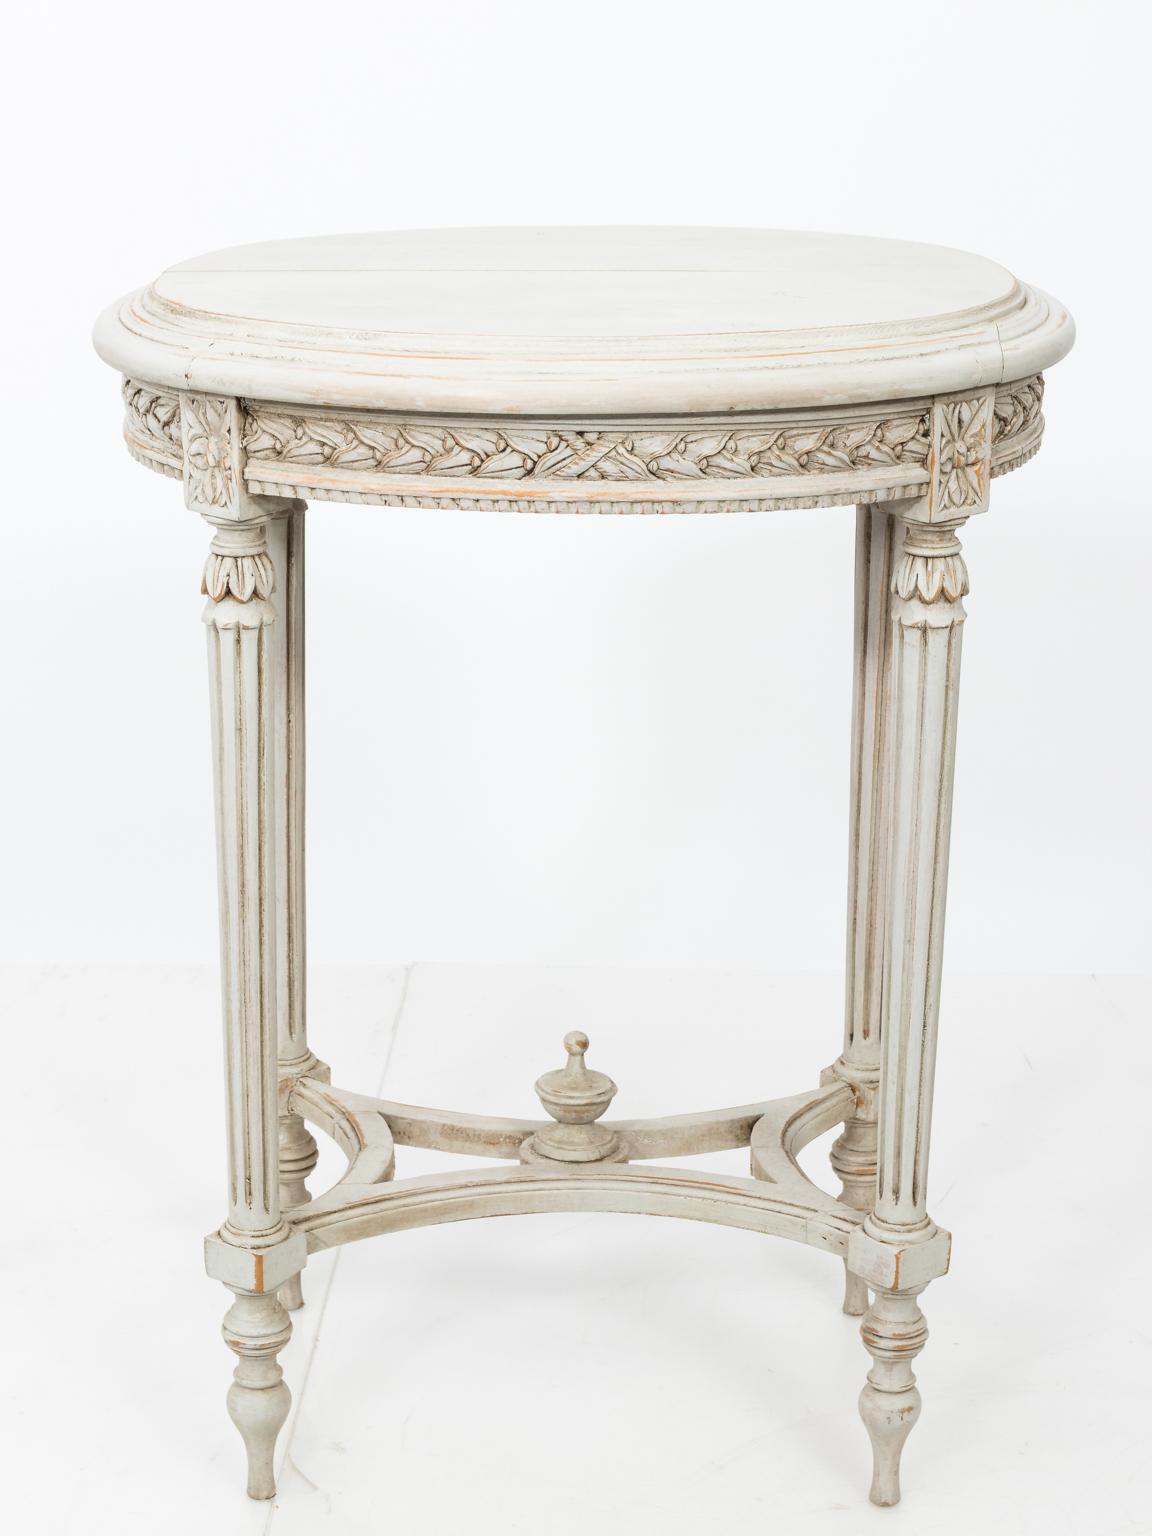 Pair of Swedish painted side tables with cross stretcher, fluted legs, and carved laurel leaf trim on the skirt. Please note of wear with age.